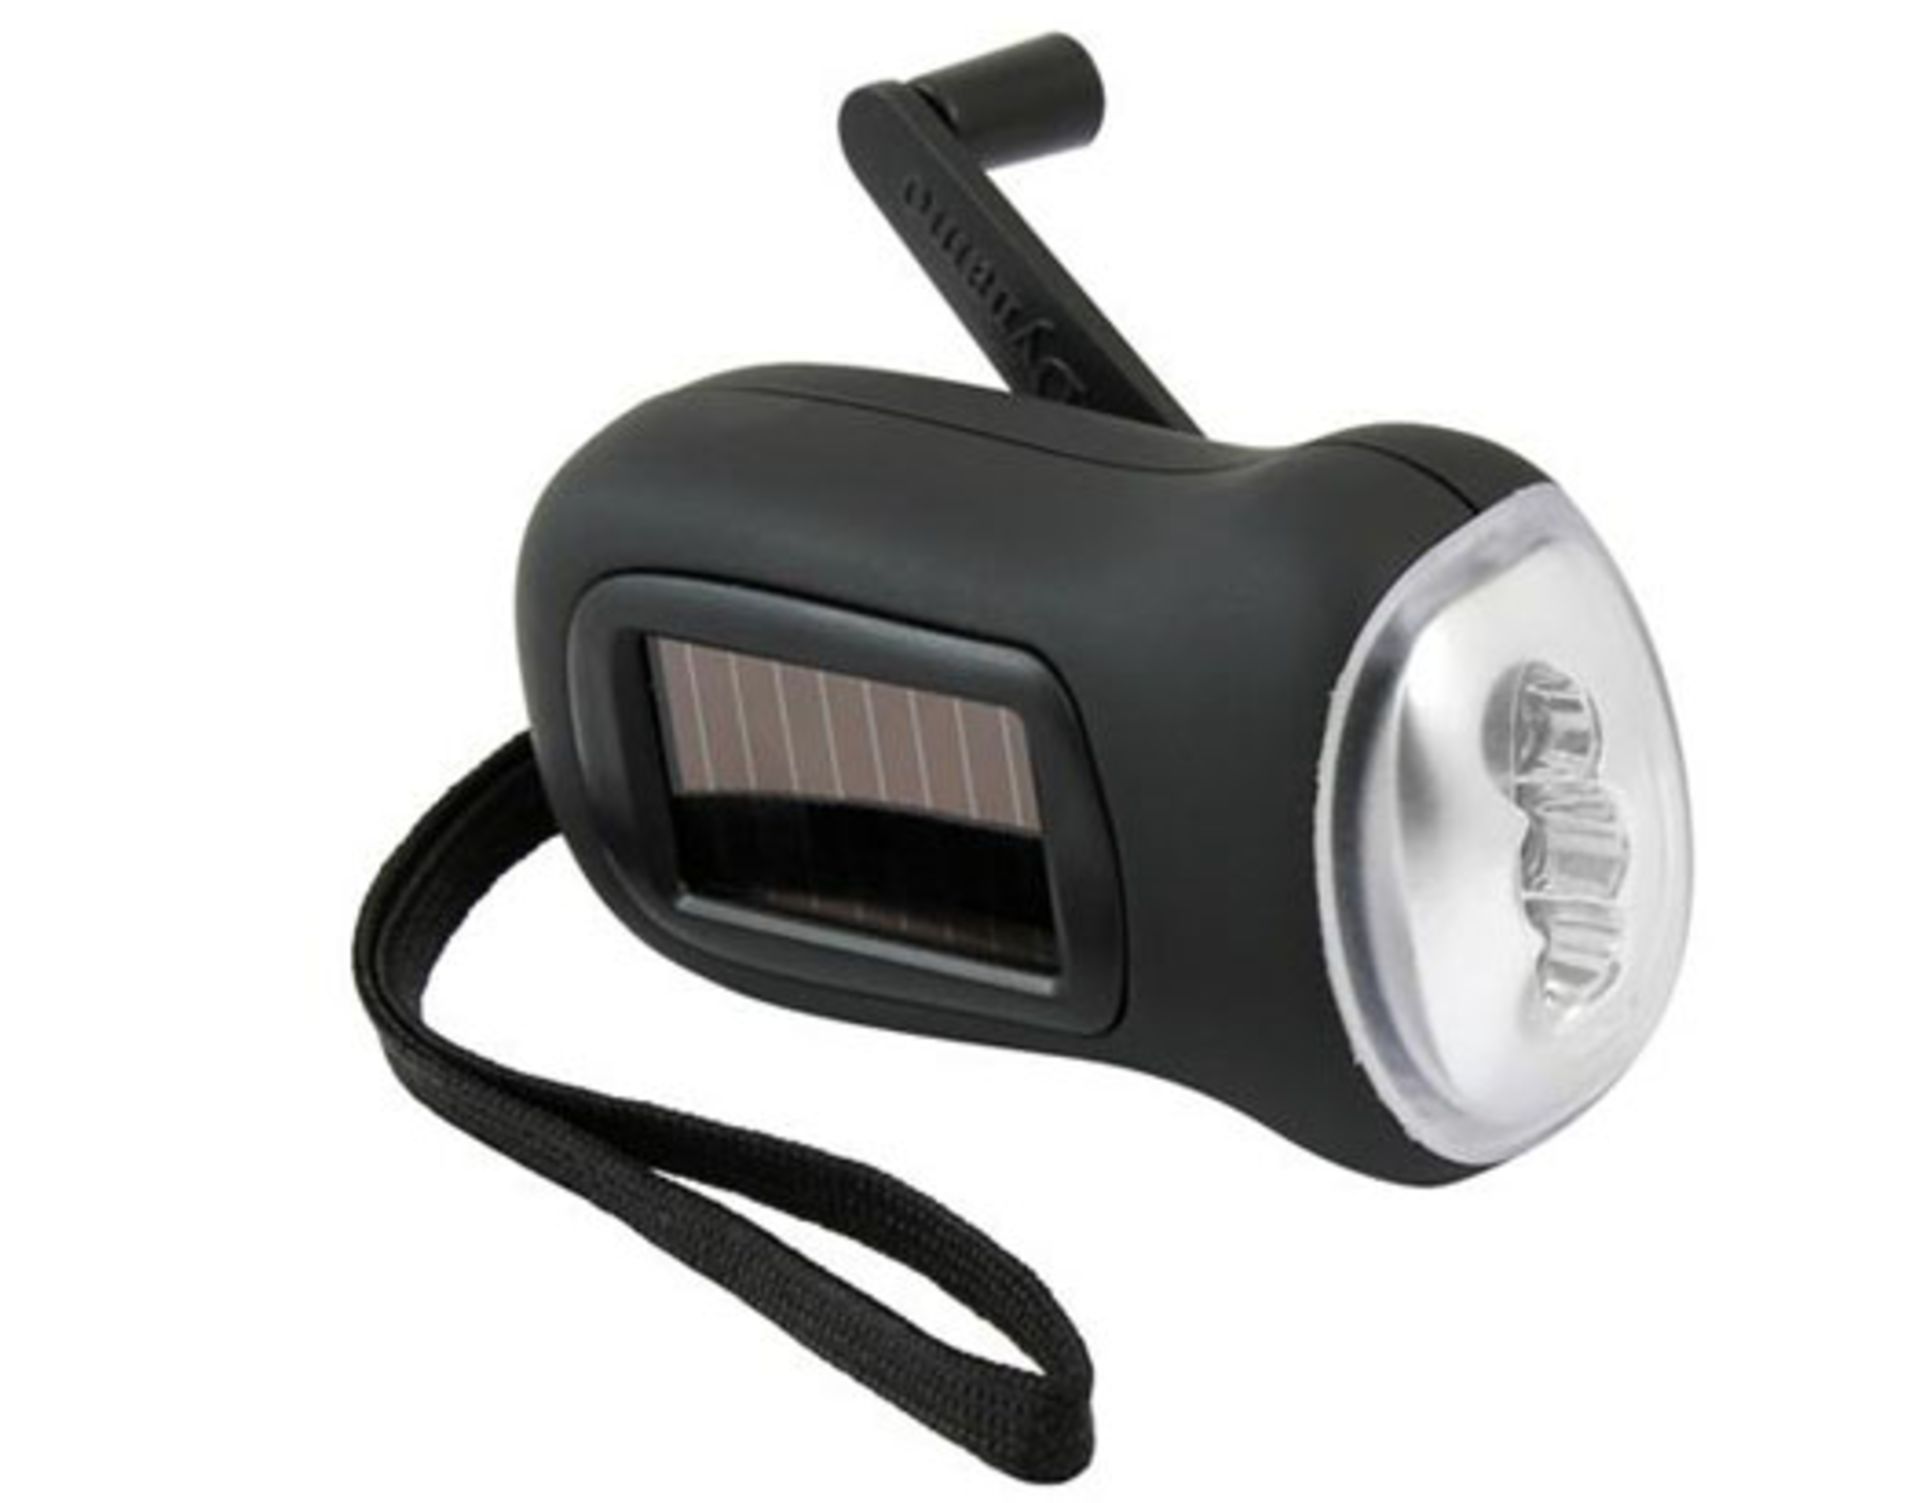 V *TRADE QTY* Brand New 3 LED Wind Up Solar Torch X 6 YOUR BID PRICE TO BE MULTIPLIED BY SIX